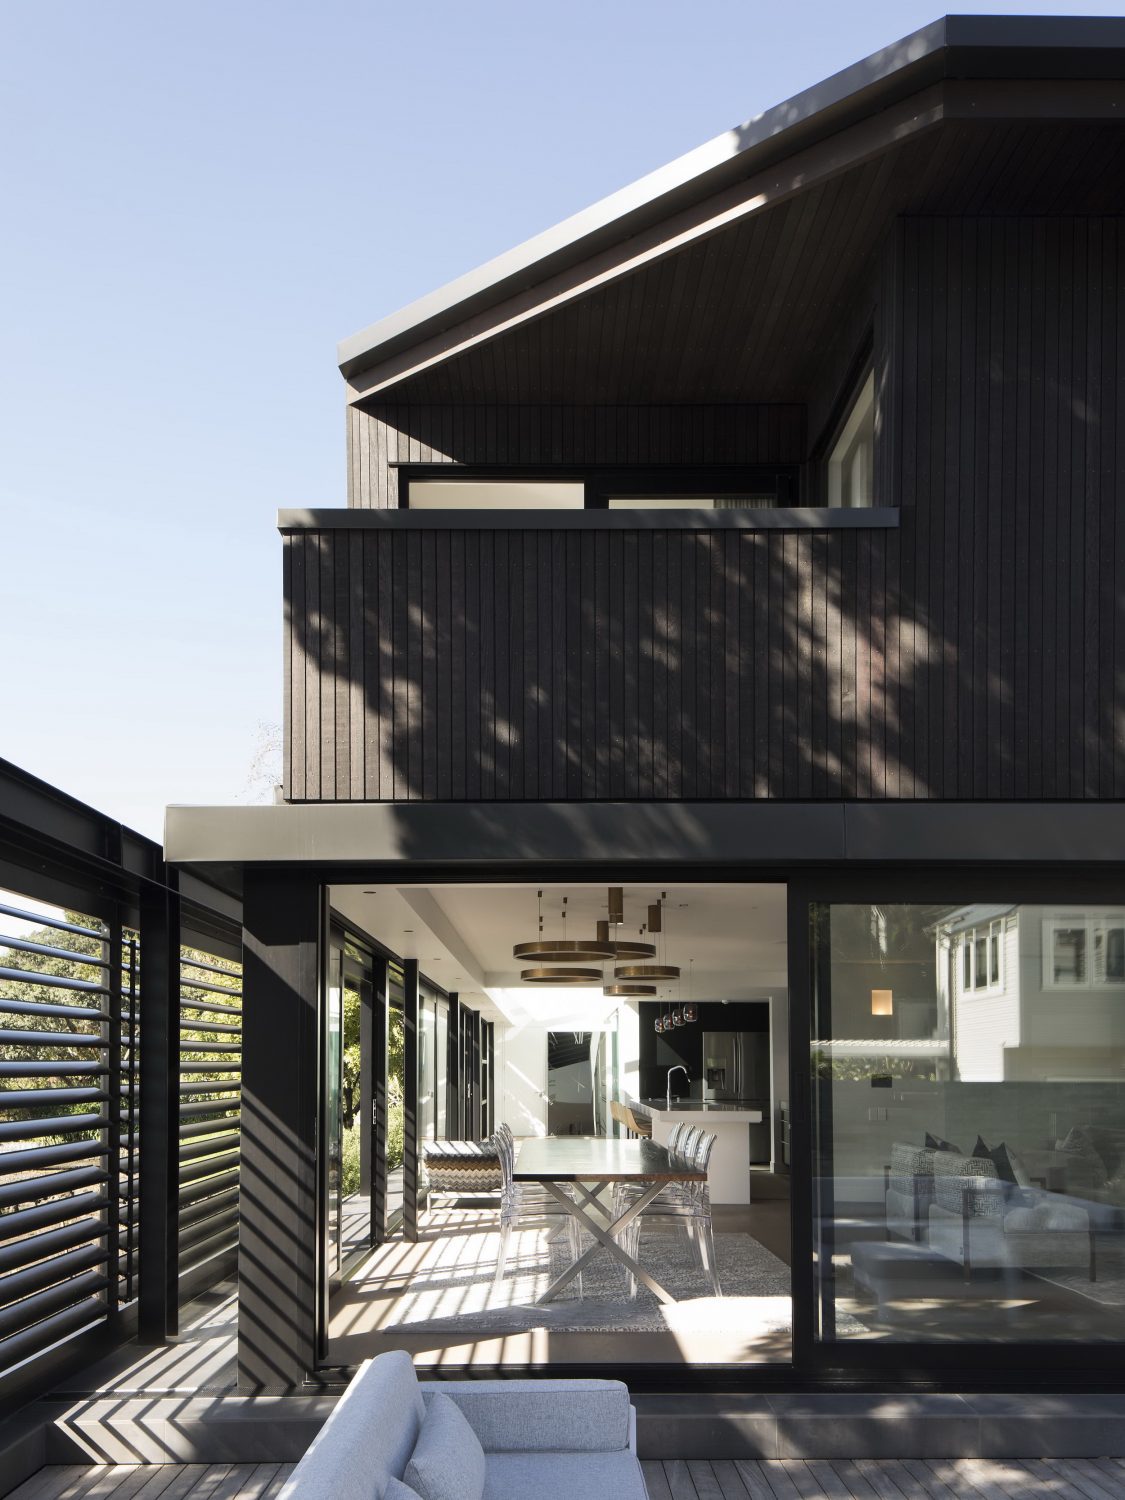 The Tailored Home by Lloyd Hartley Architects